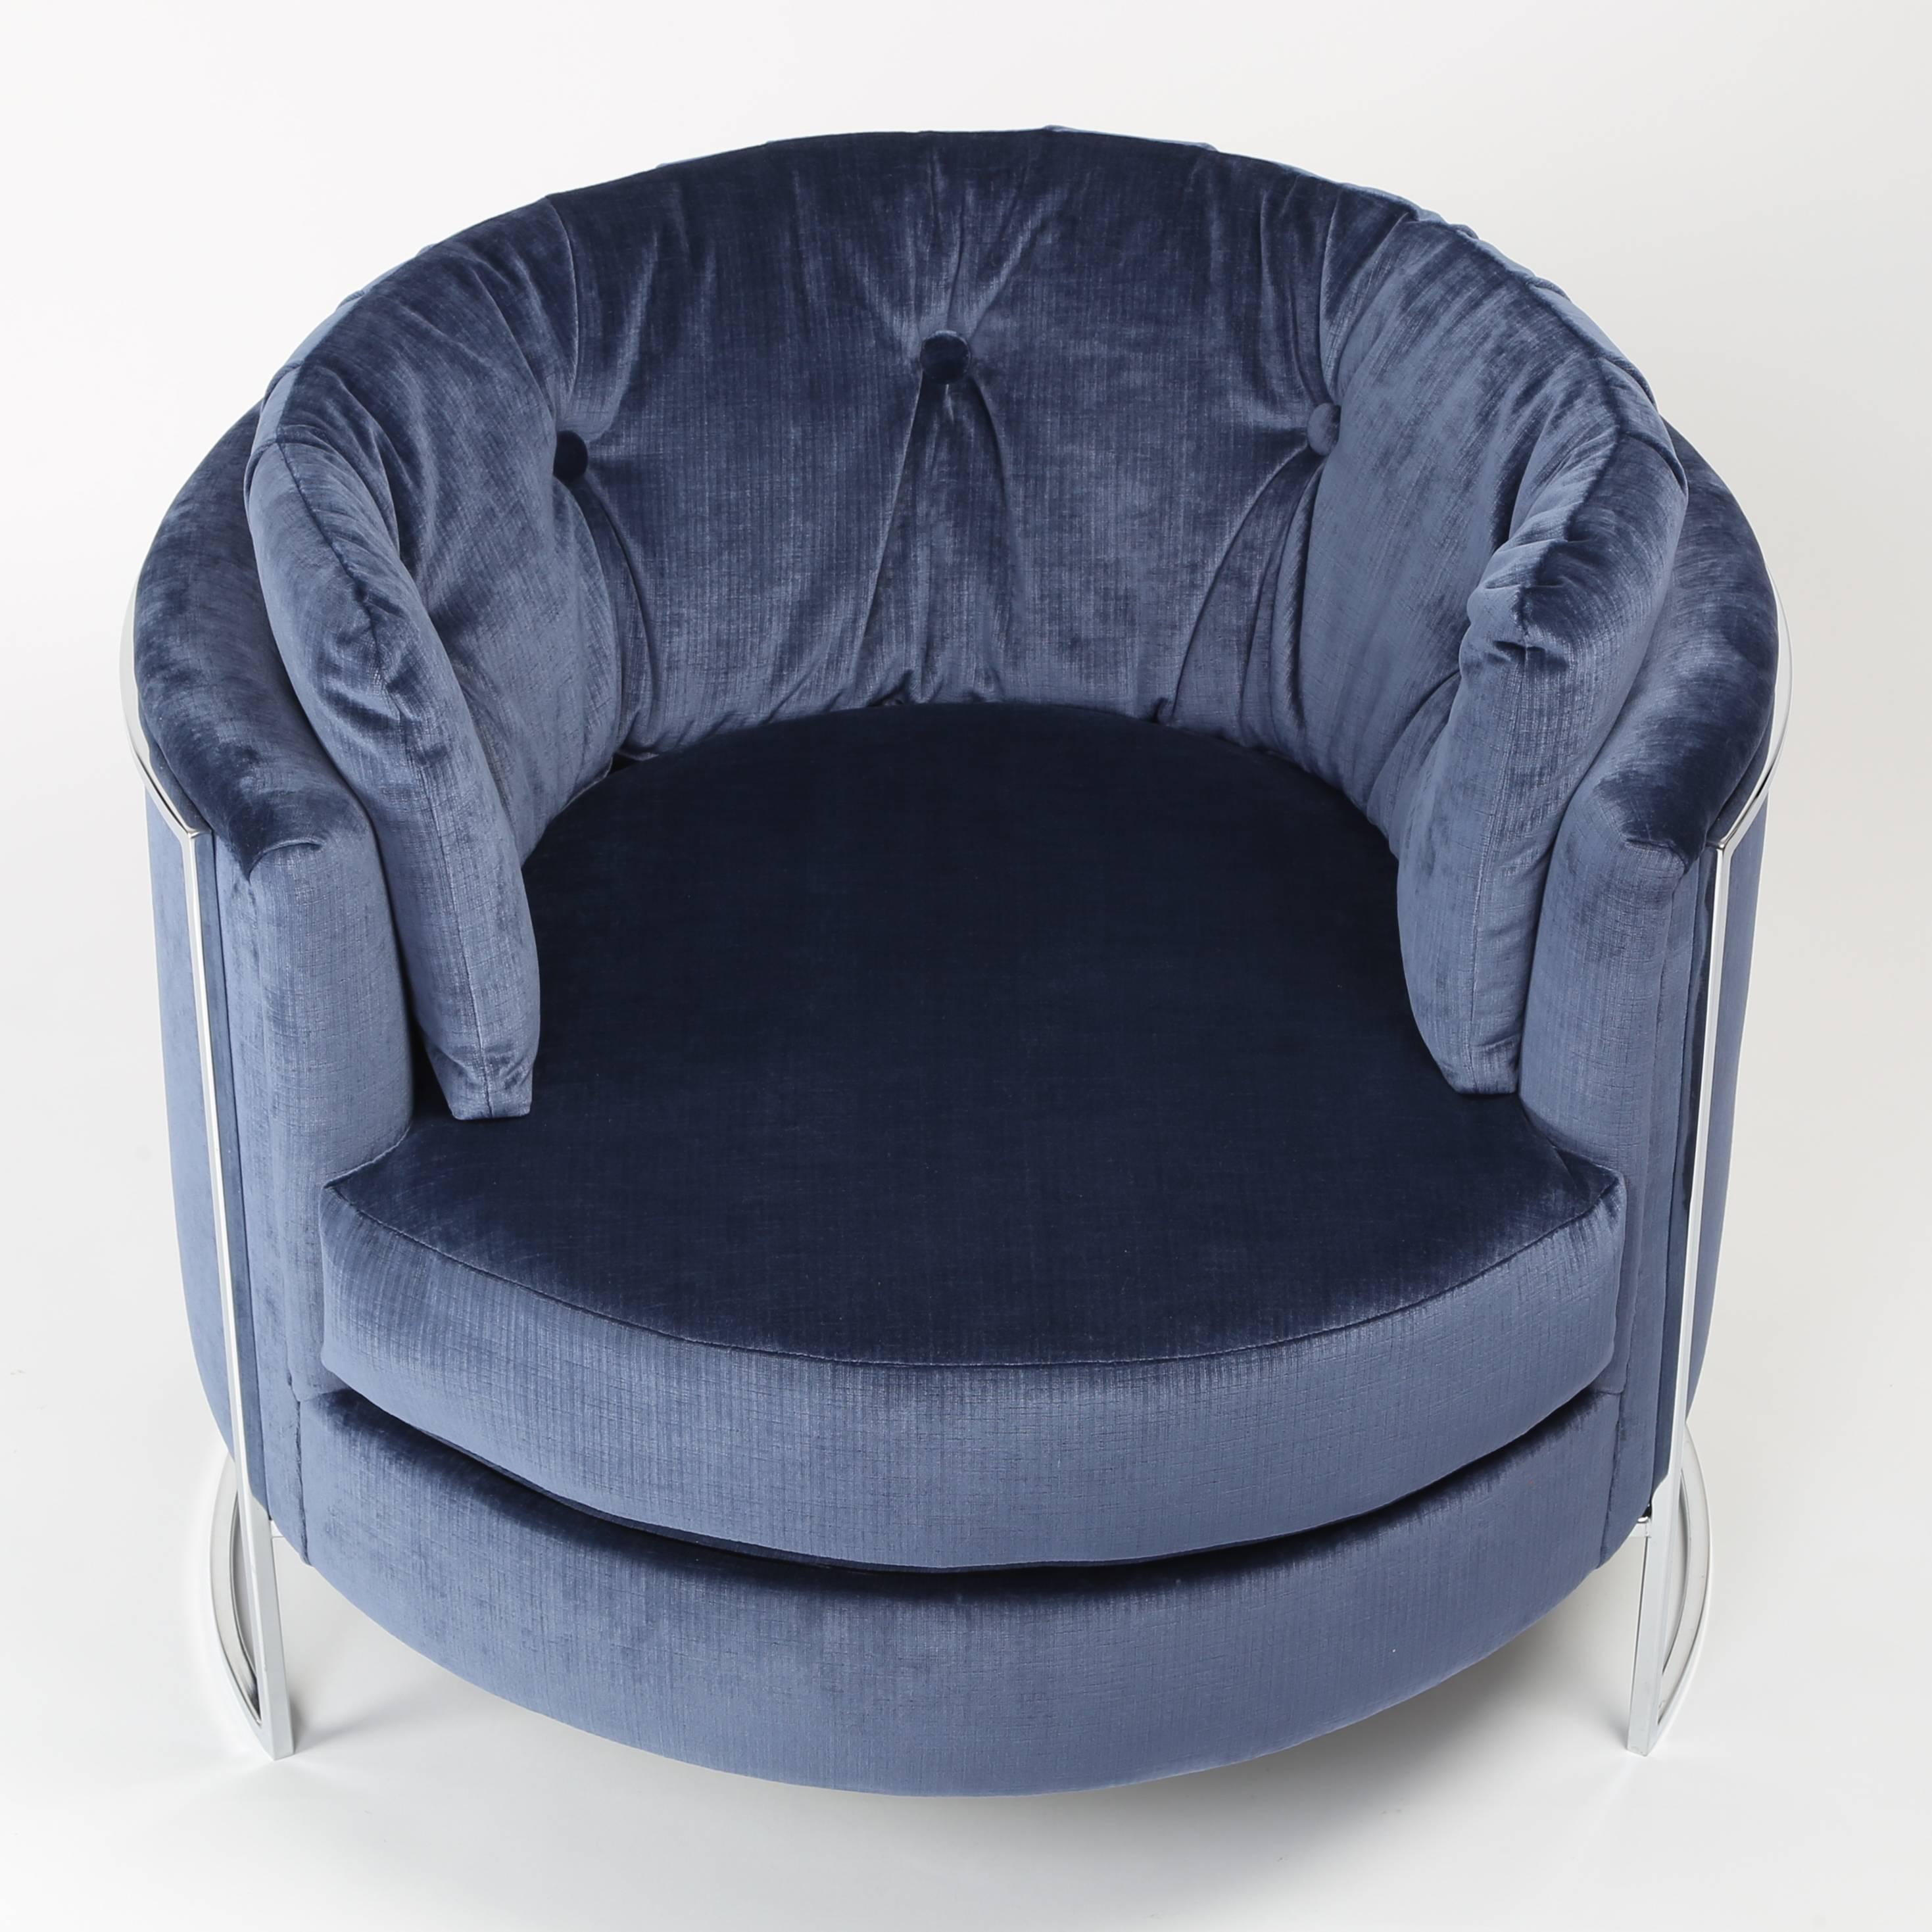 Cozy 1970s barrel-back lounge chair by Milo Baughman. Circular seat is raised on a curved, polished-chrome frame, with a loose seat cushion and a hook-and-loop-attached tufted back cushion. Newly reupholstered in a rich blue velvet. 



